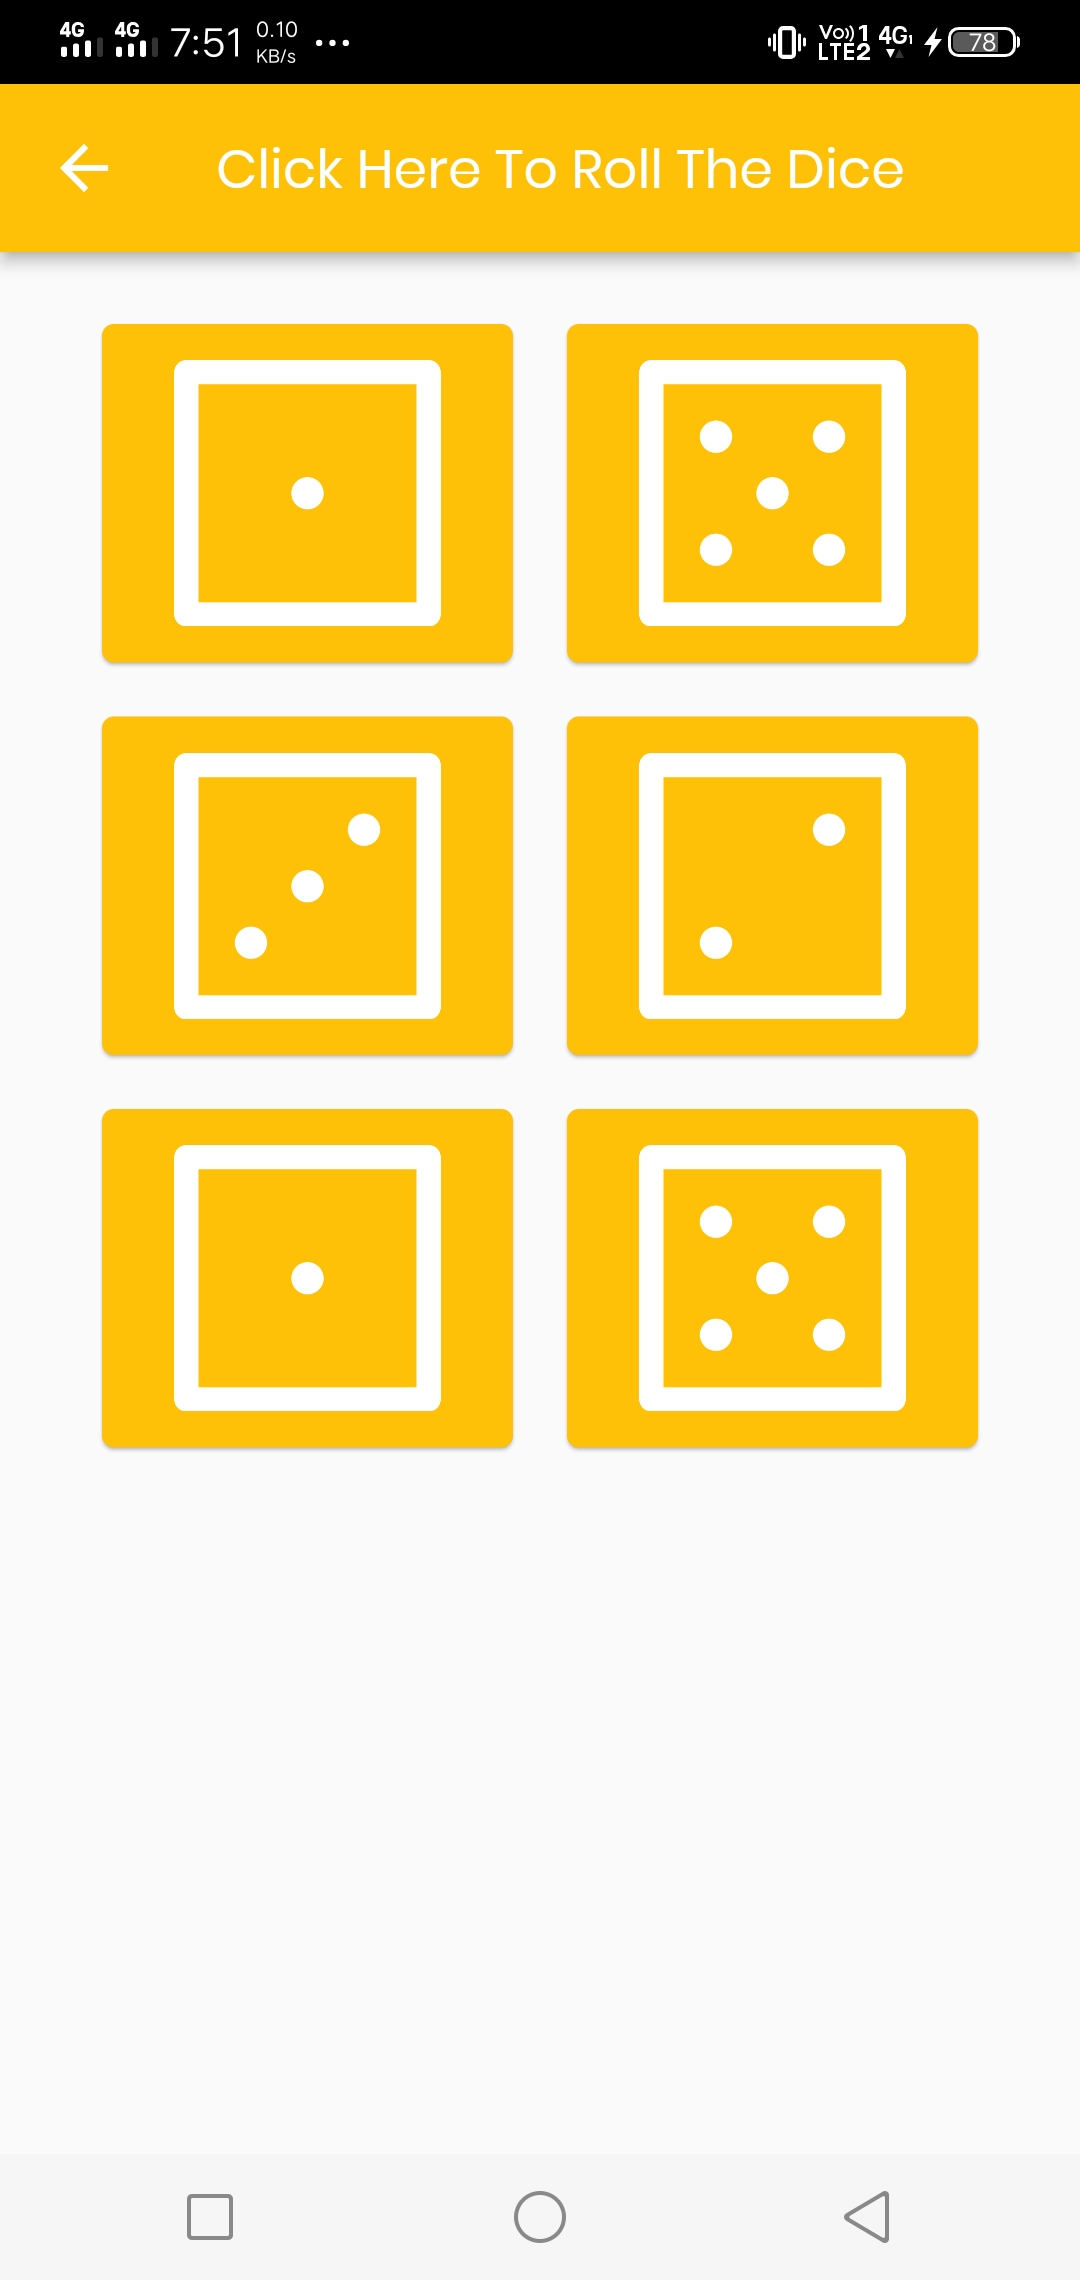 Flutter Dice Game Made In Flutter 2.8 with null safety